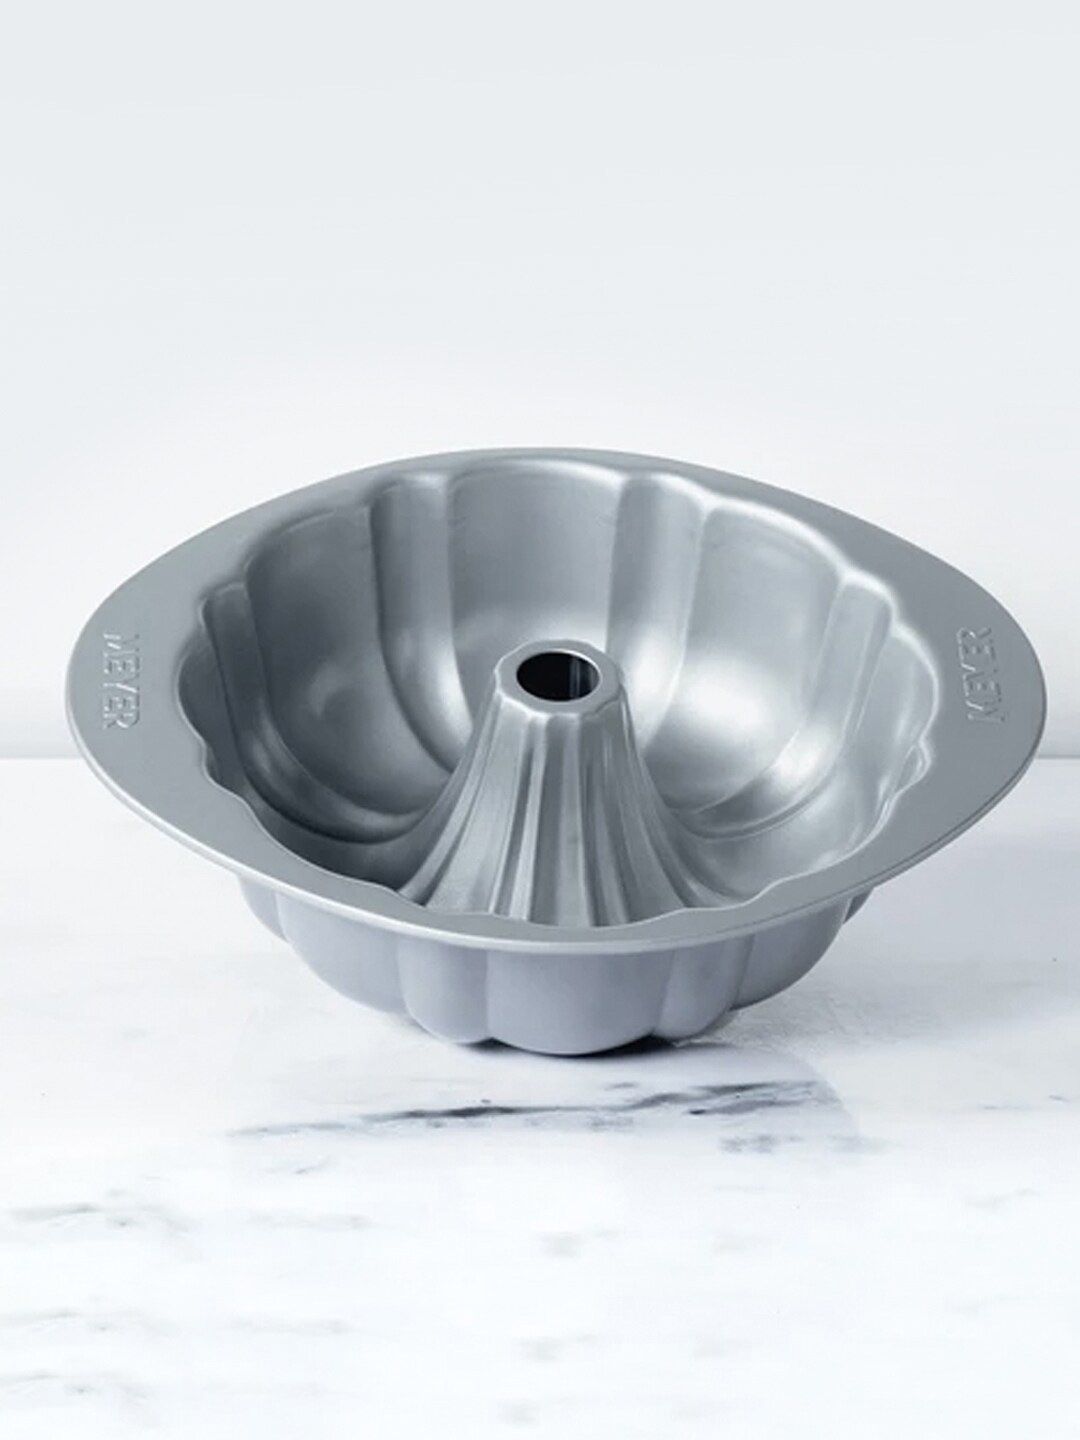 MEYER Grey Textured Bakemaster 25 cm Fluted Mold Pan Price in India